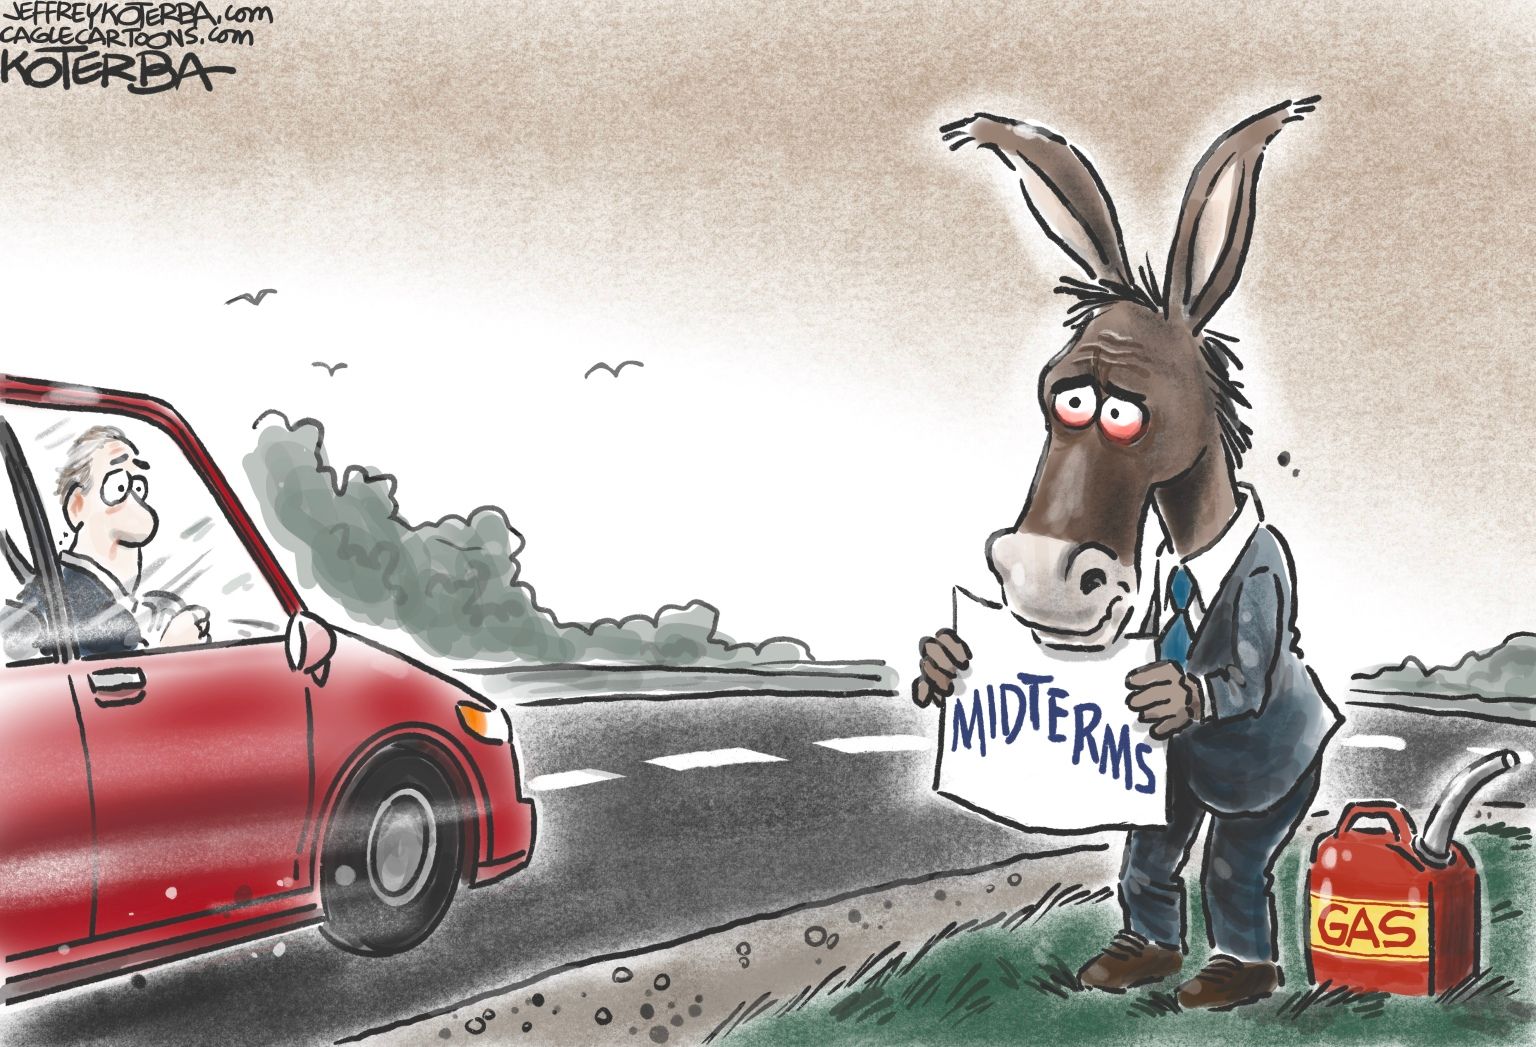 Gas Prices and Midterms - newsjustin.press - editorial political cartoons